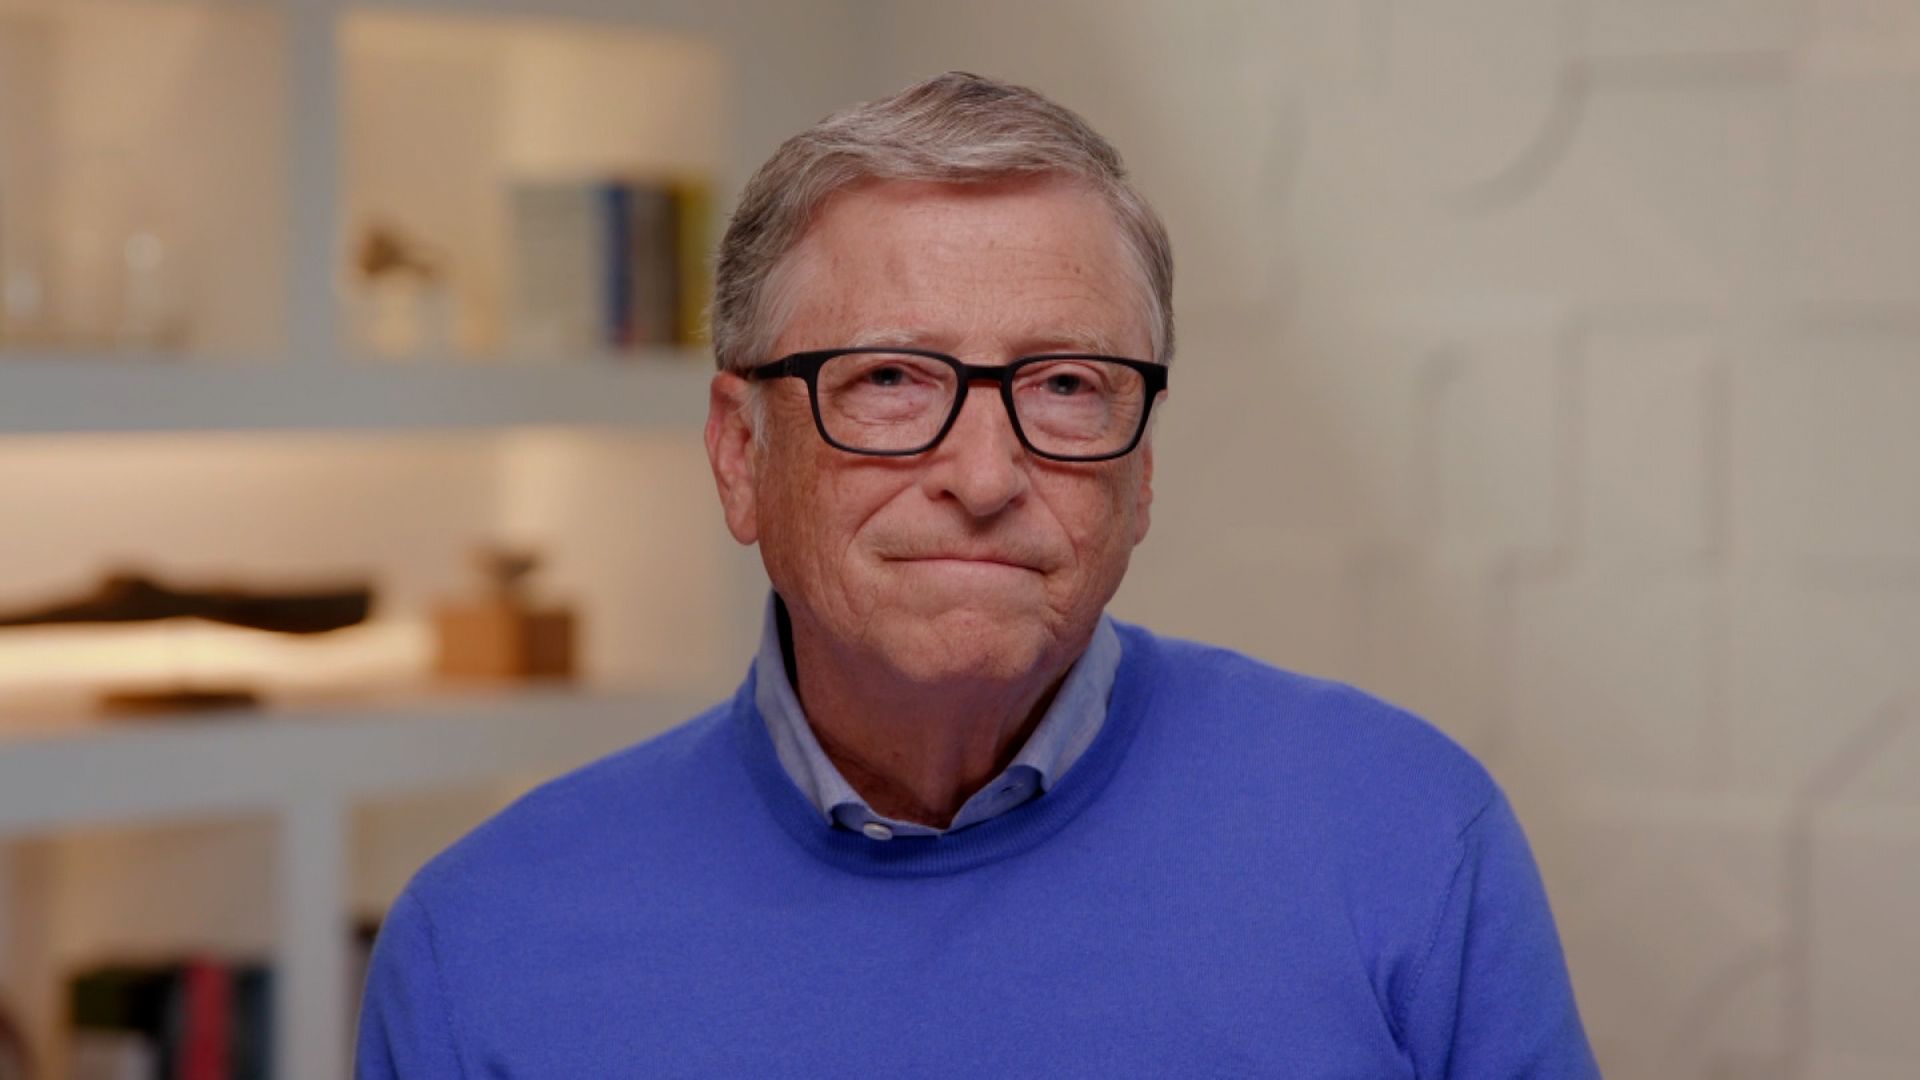 Bill Gates Porn Video - Bill Gates says he regrets the time spent with Jeffrey Epstein: 'It was a  huge mistake' | CNN Business